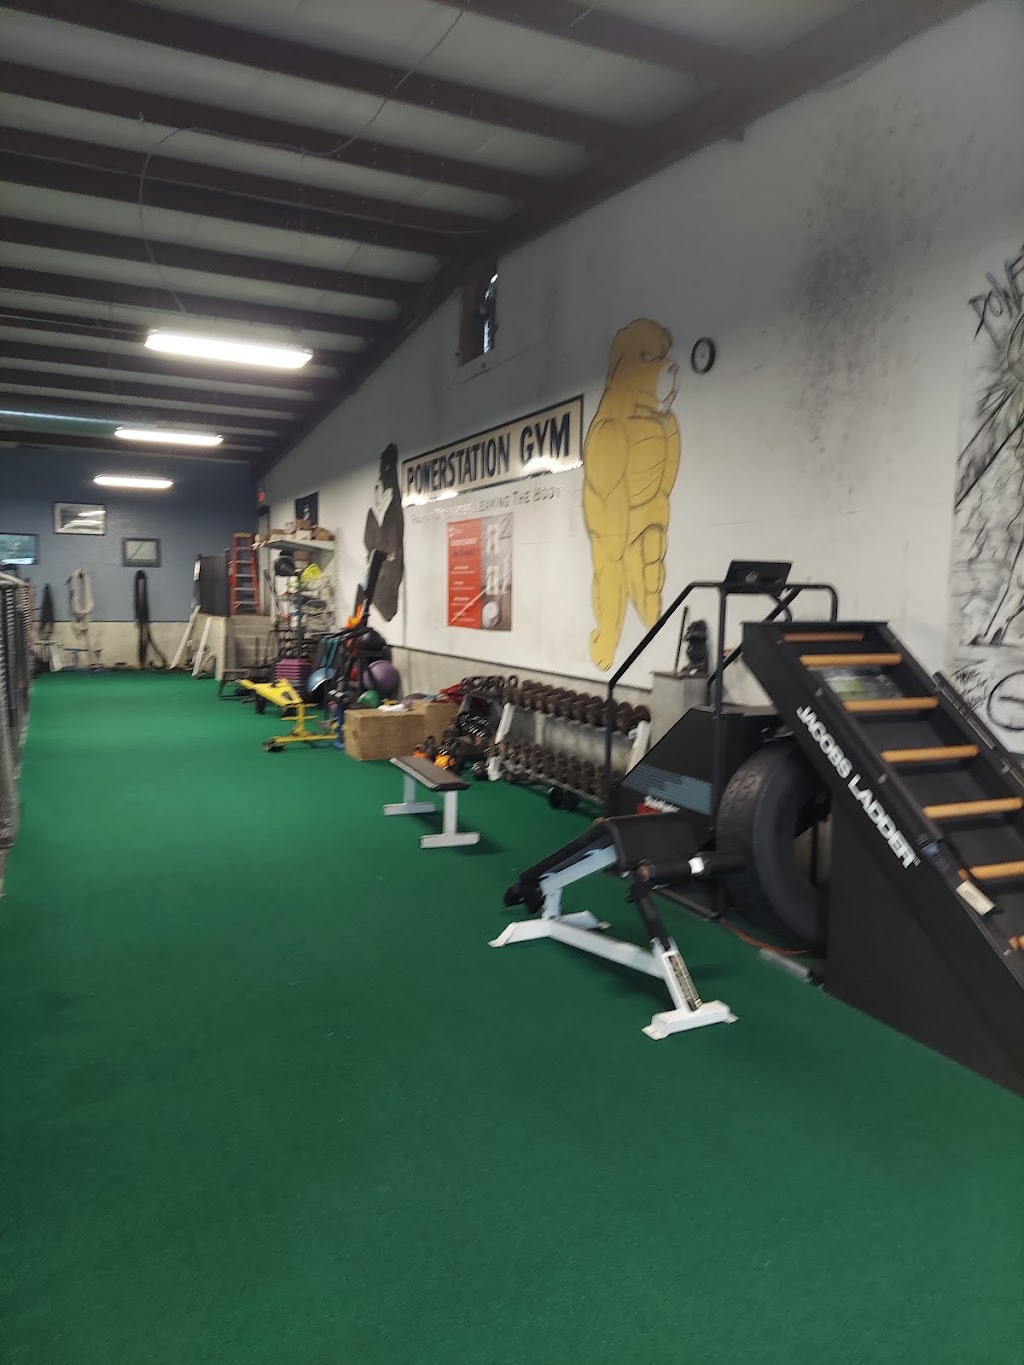 Powerstation Gym & Sports Conditioning. | 4343 S Dixie Hwy, Middletown, OH 45005, USA | Phone: (513) 425-8100